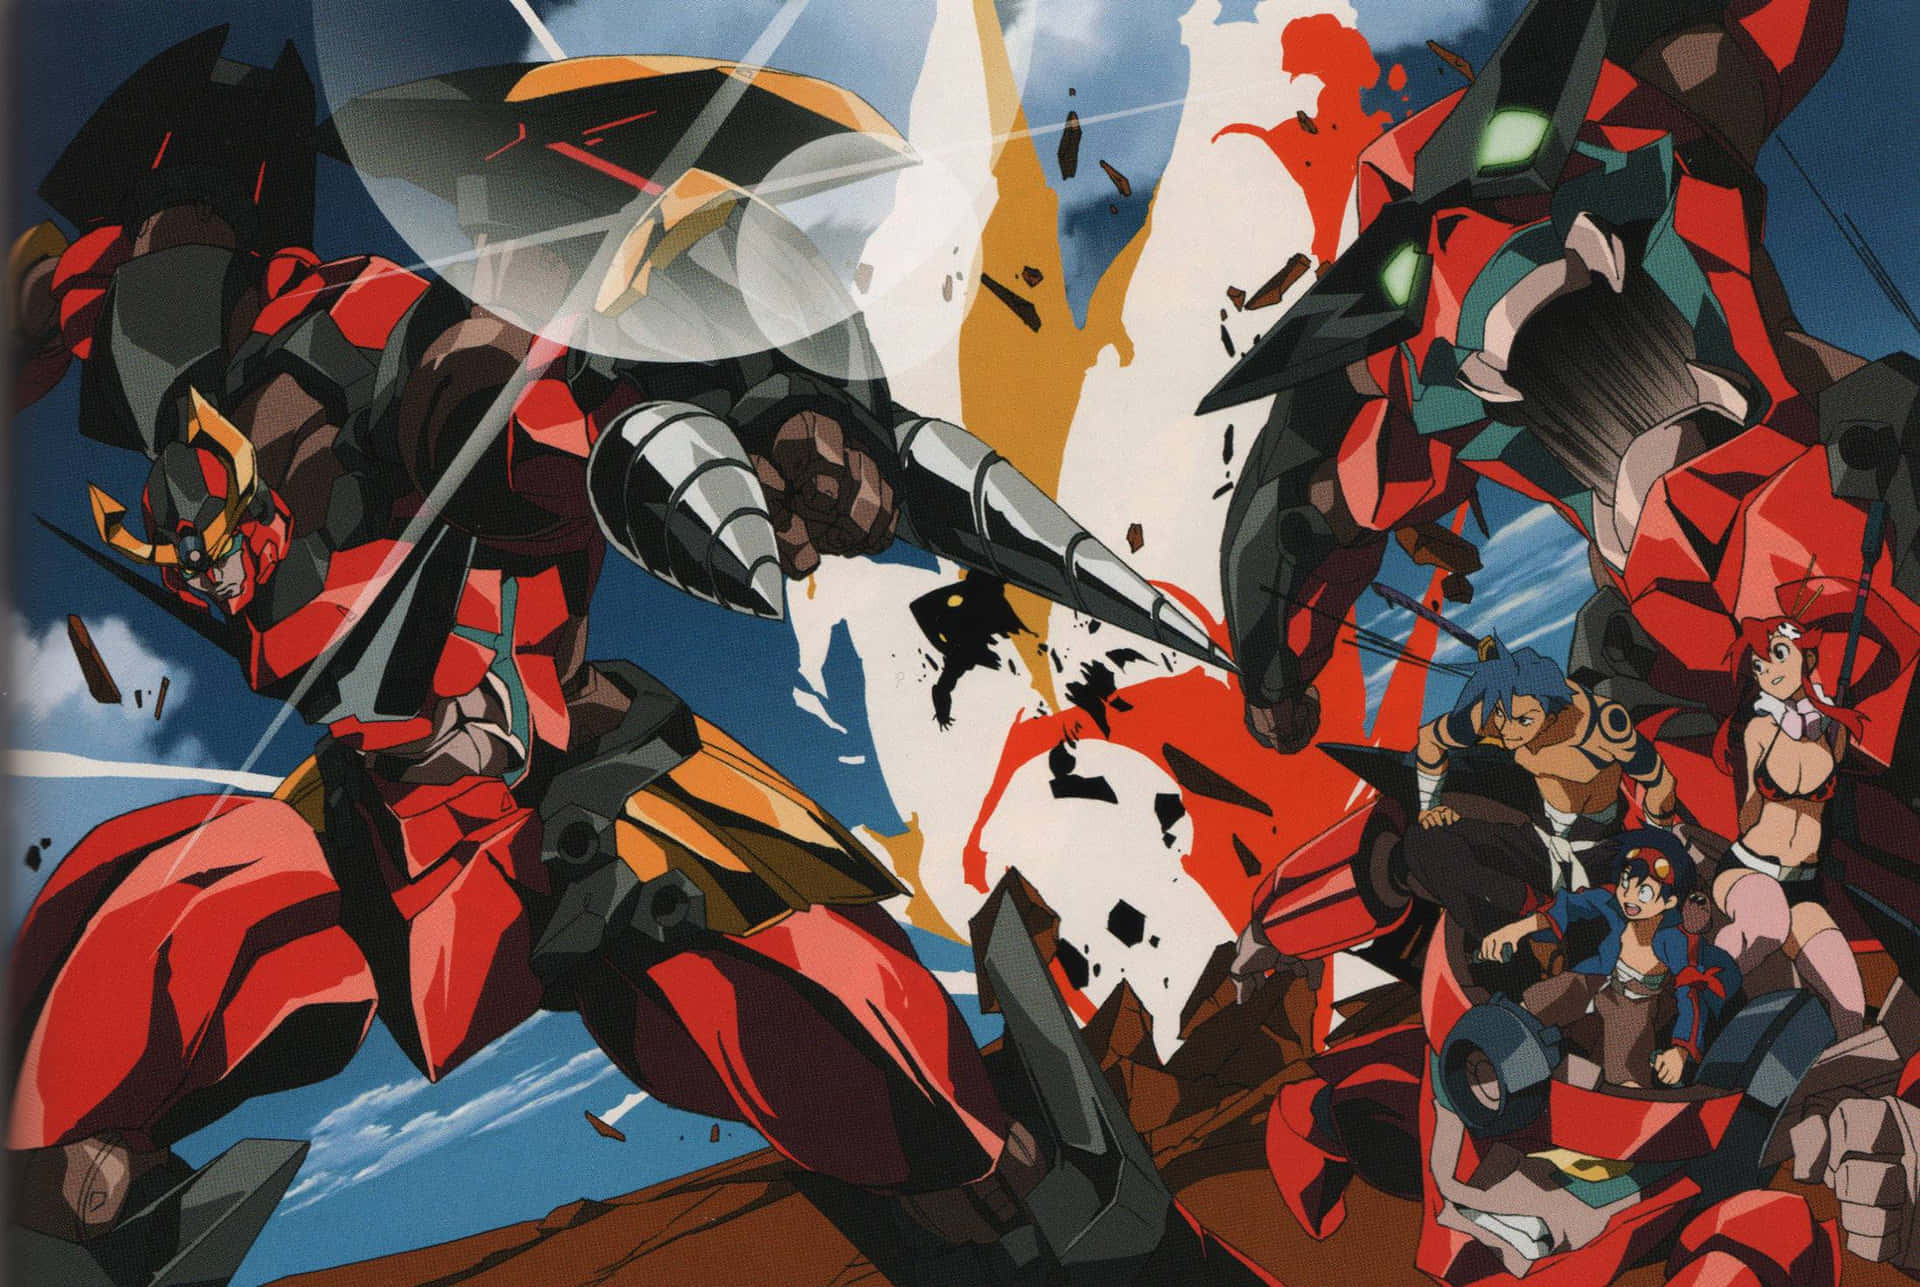 "Fight for your dreams with the Gurren Lagann"